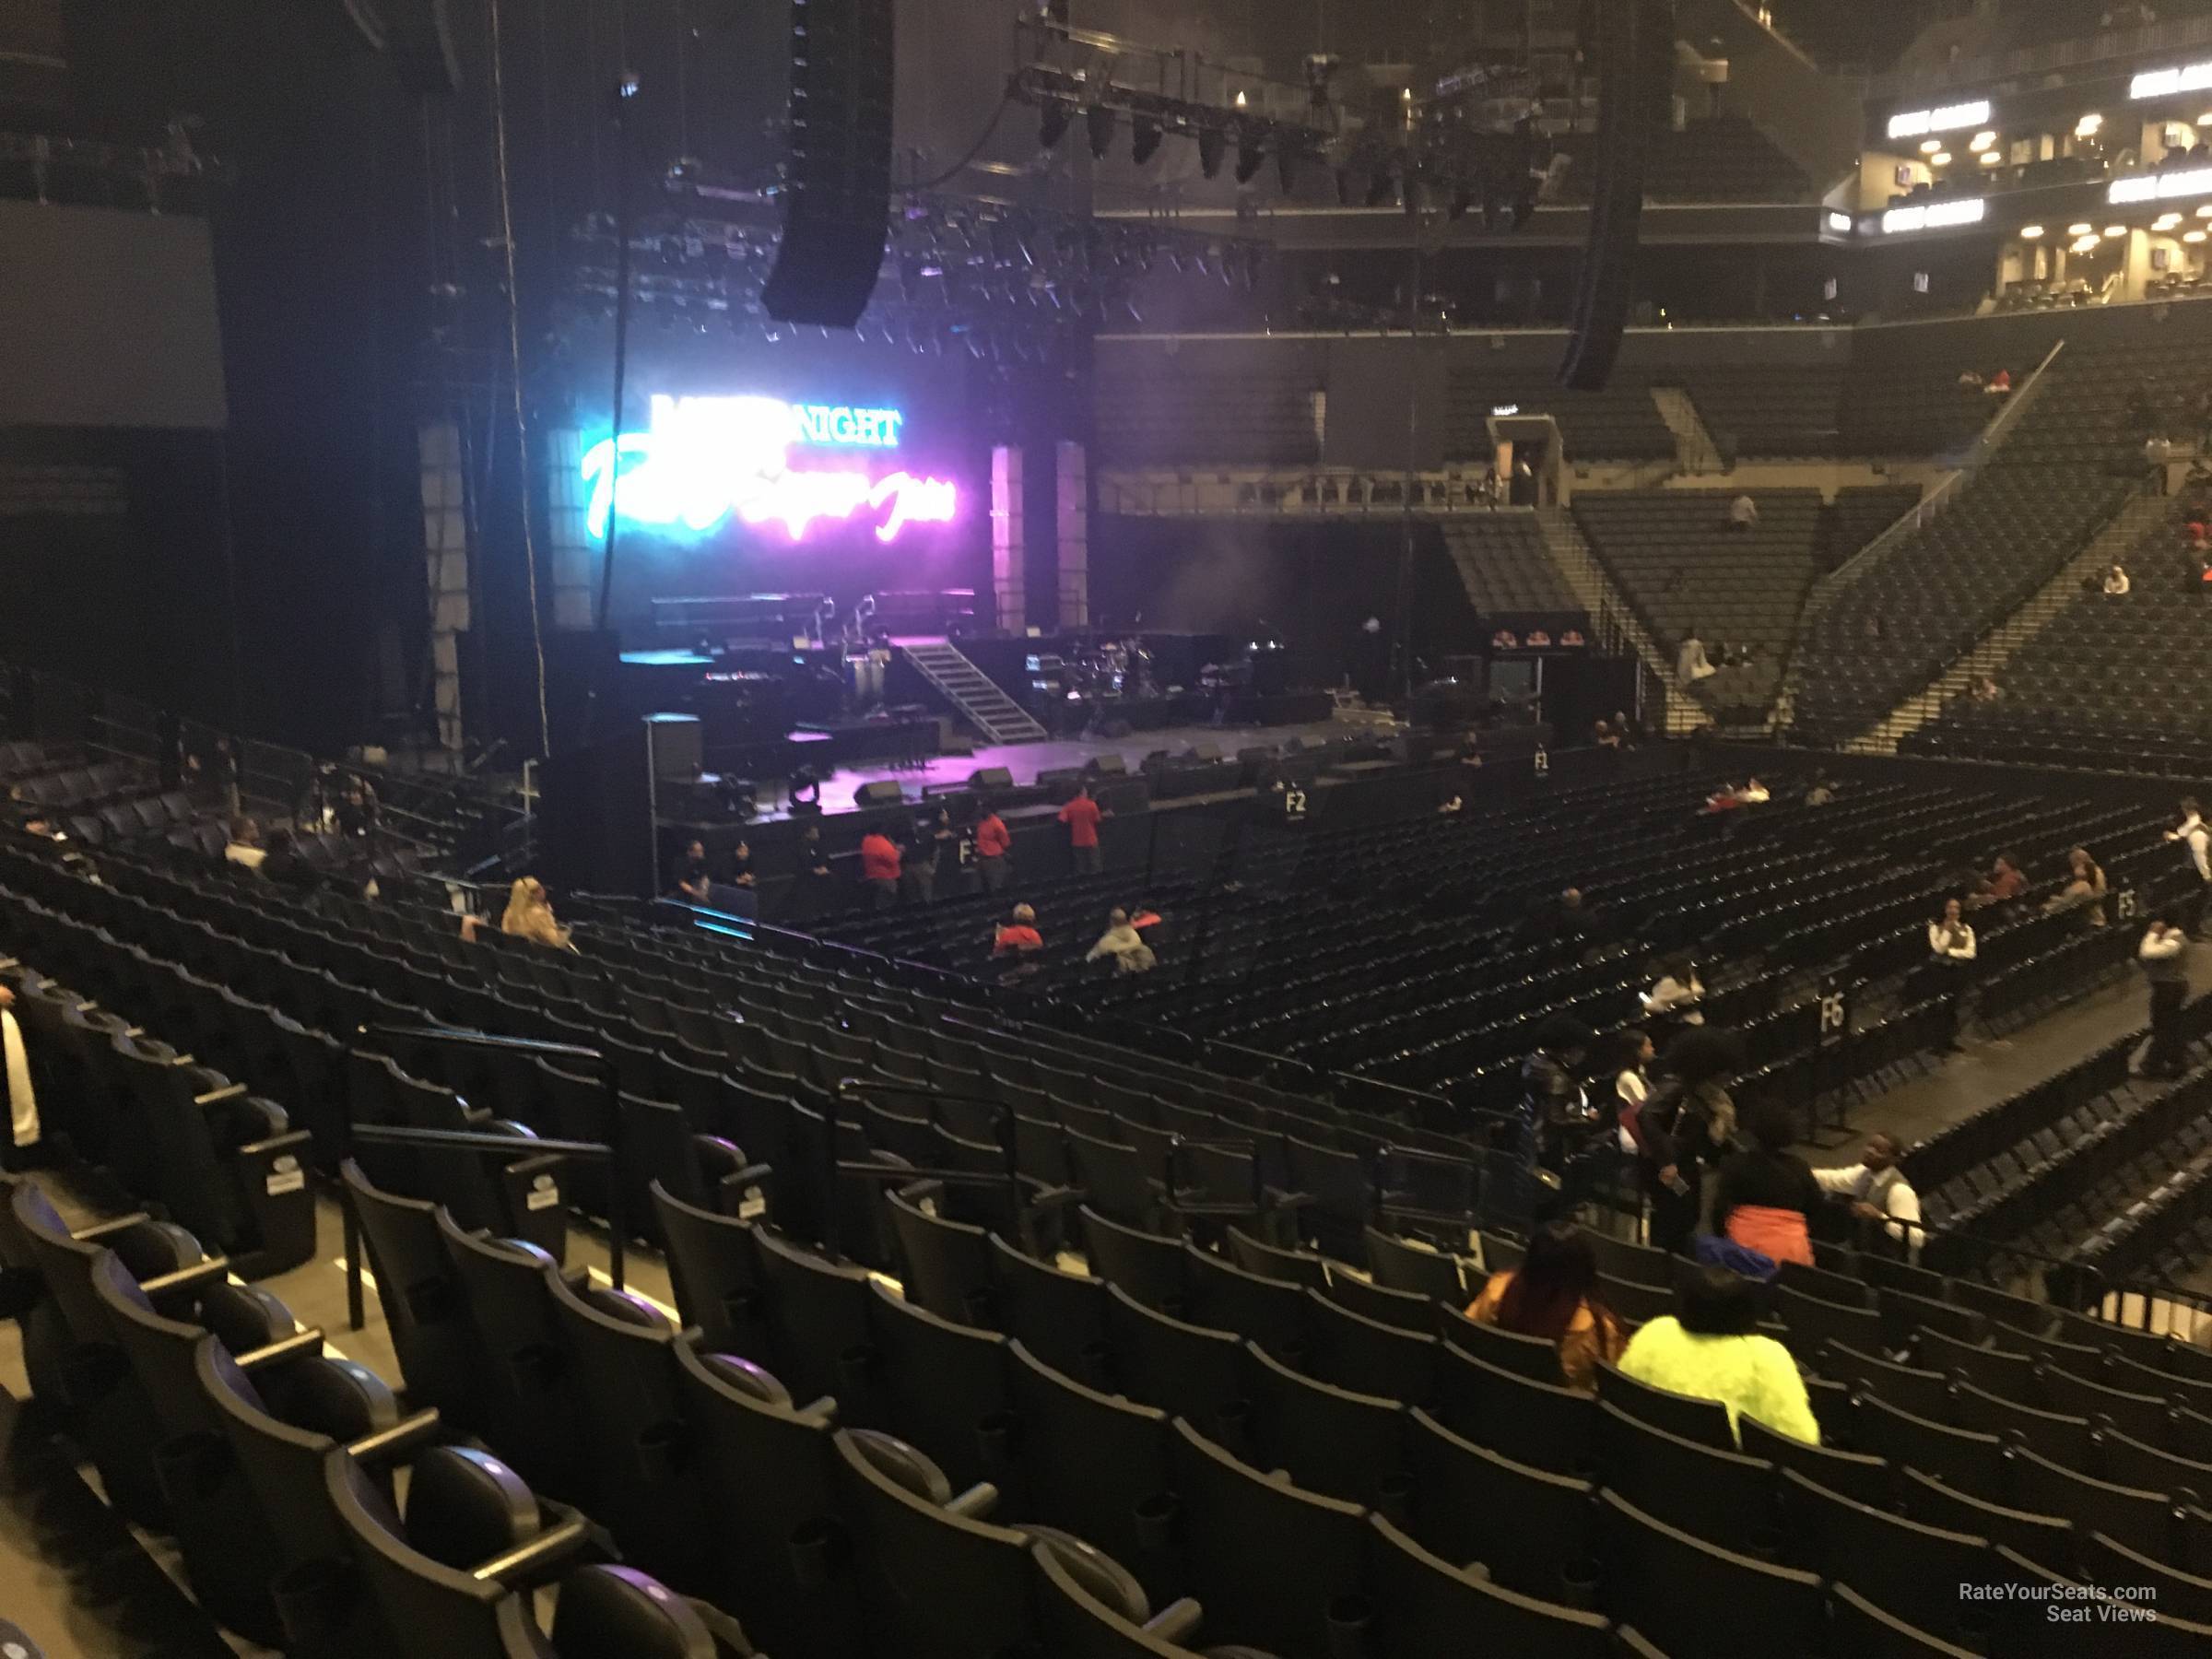 Barclays Center Section 24 Concert Seating - RateYourSeats.com